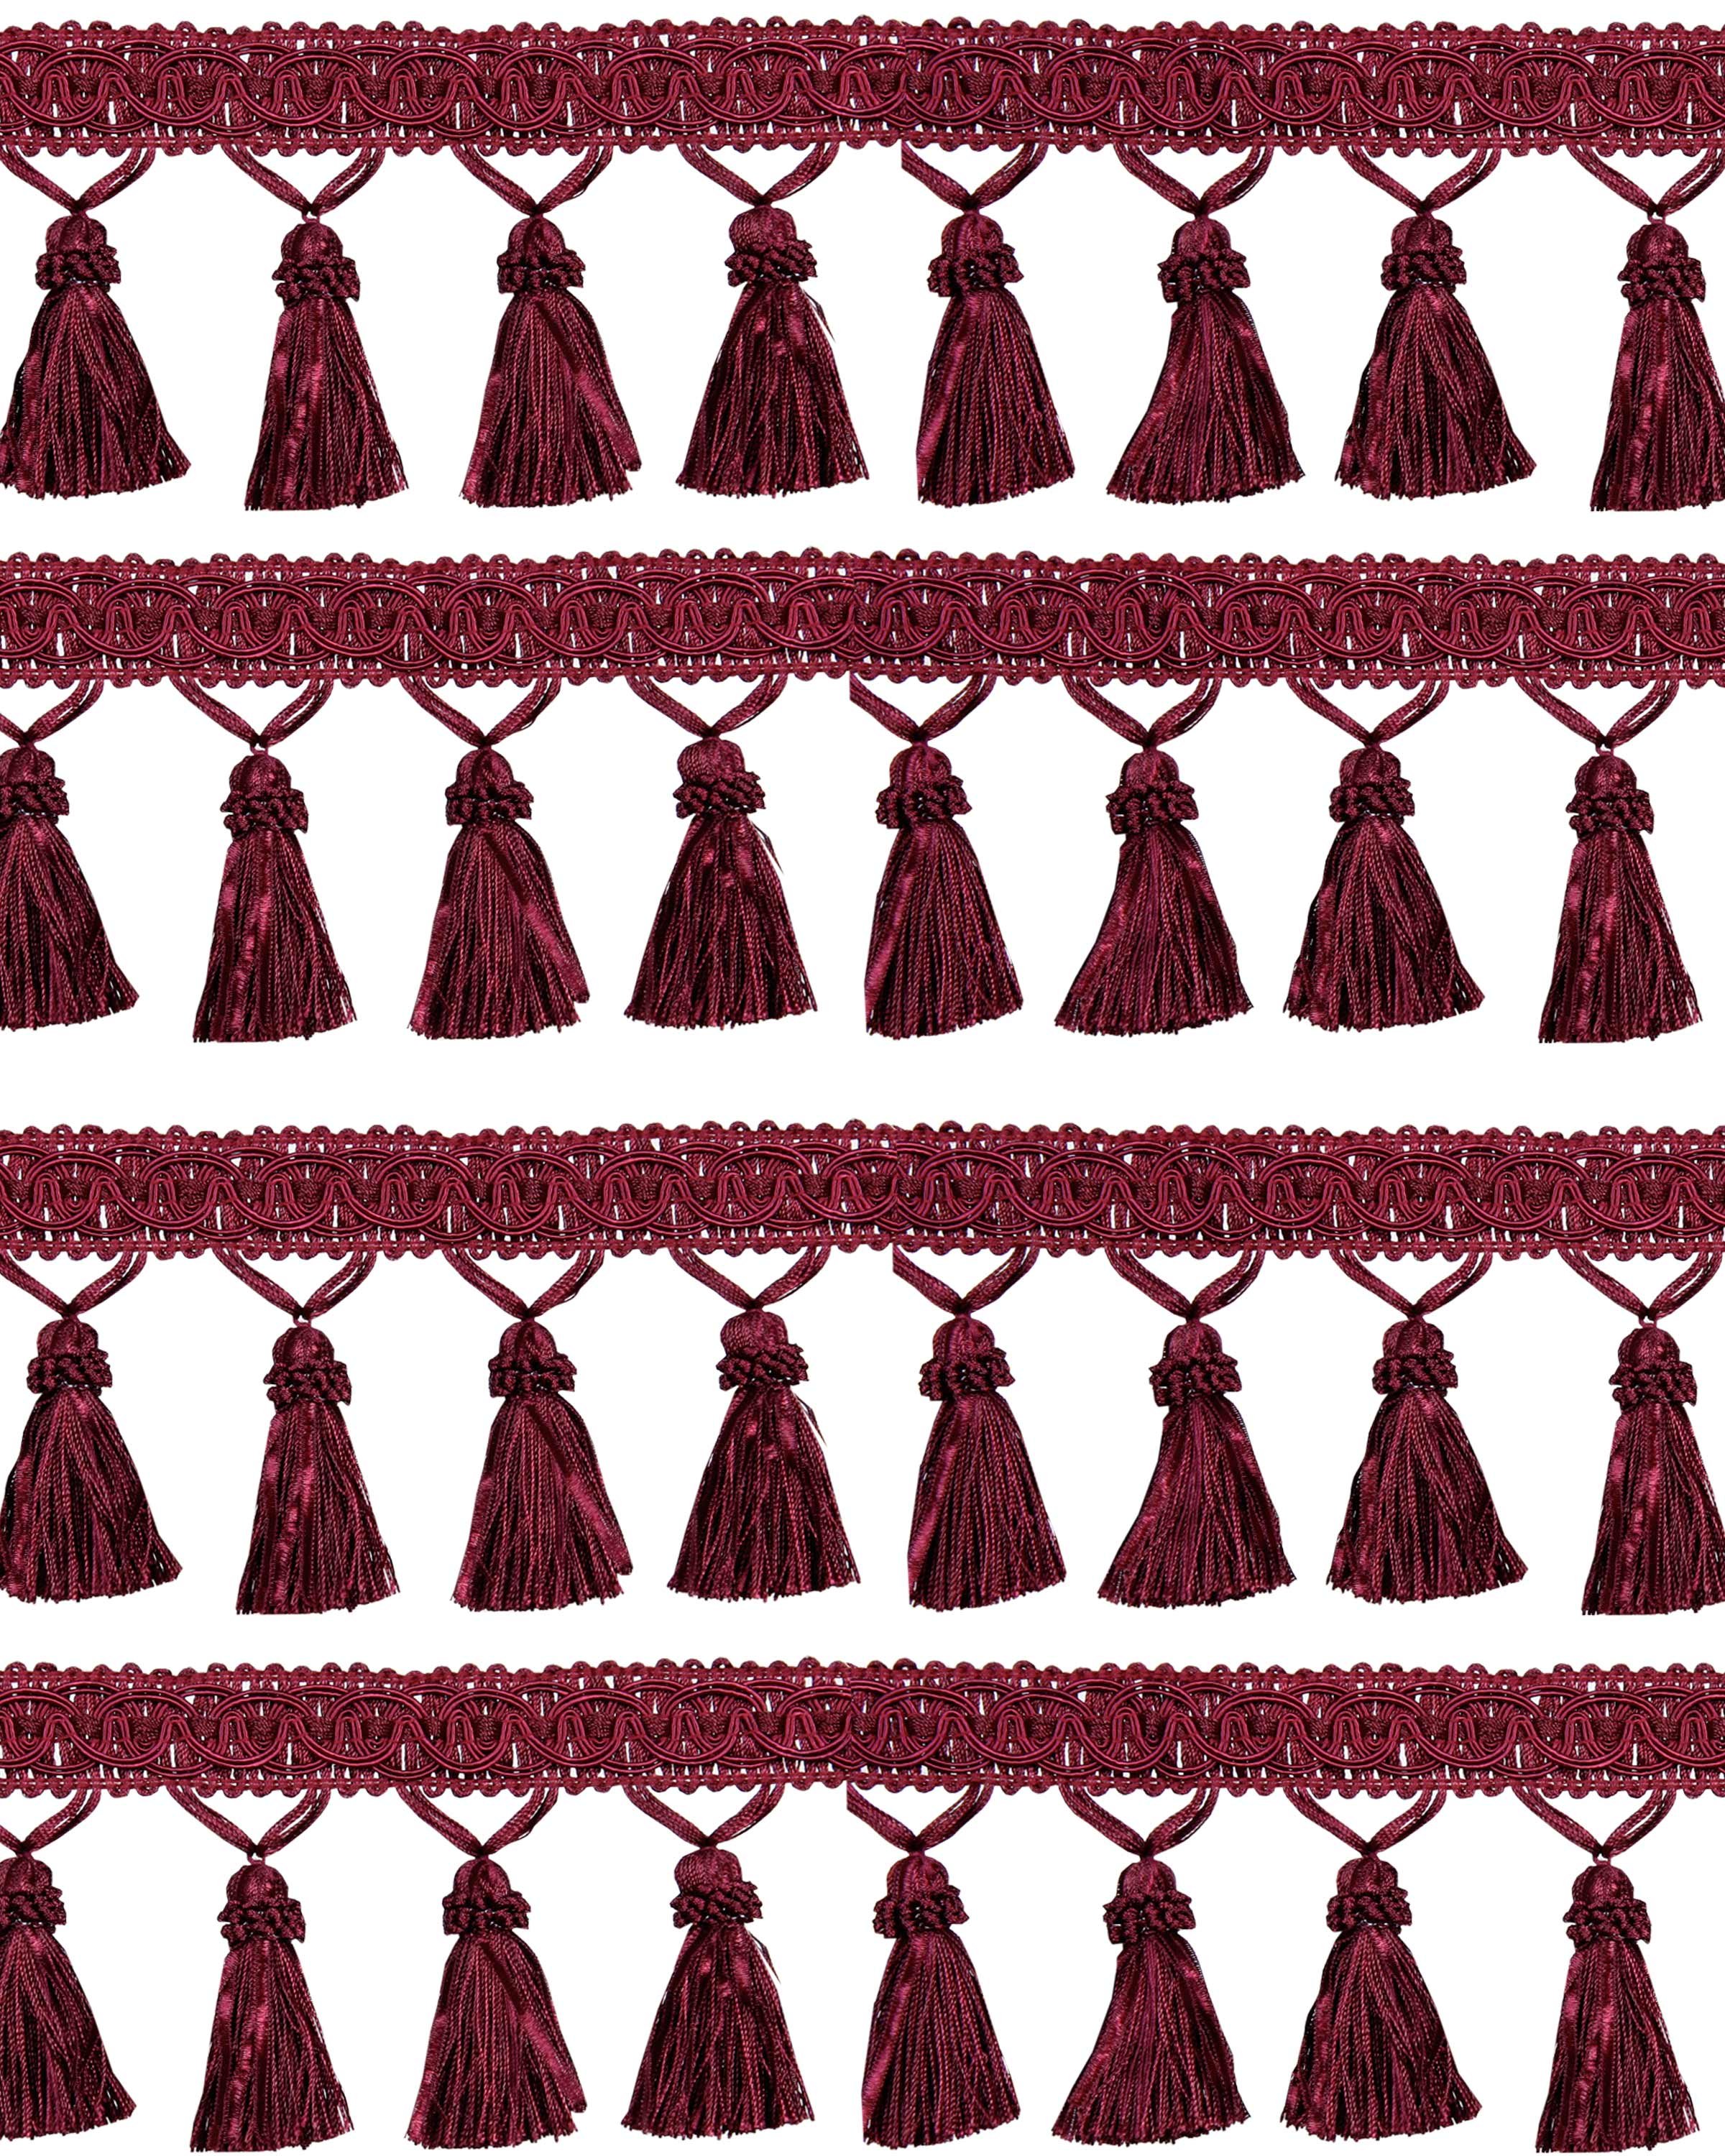 Fringe Tassels with Ribbons - Red Wine 90mm Price is per 5 metres